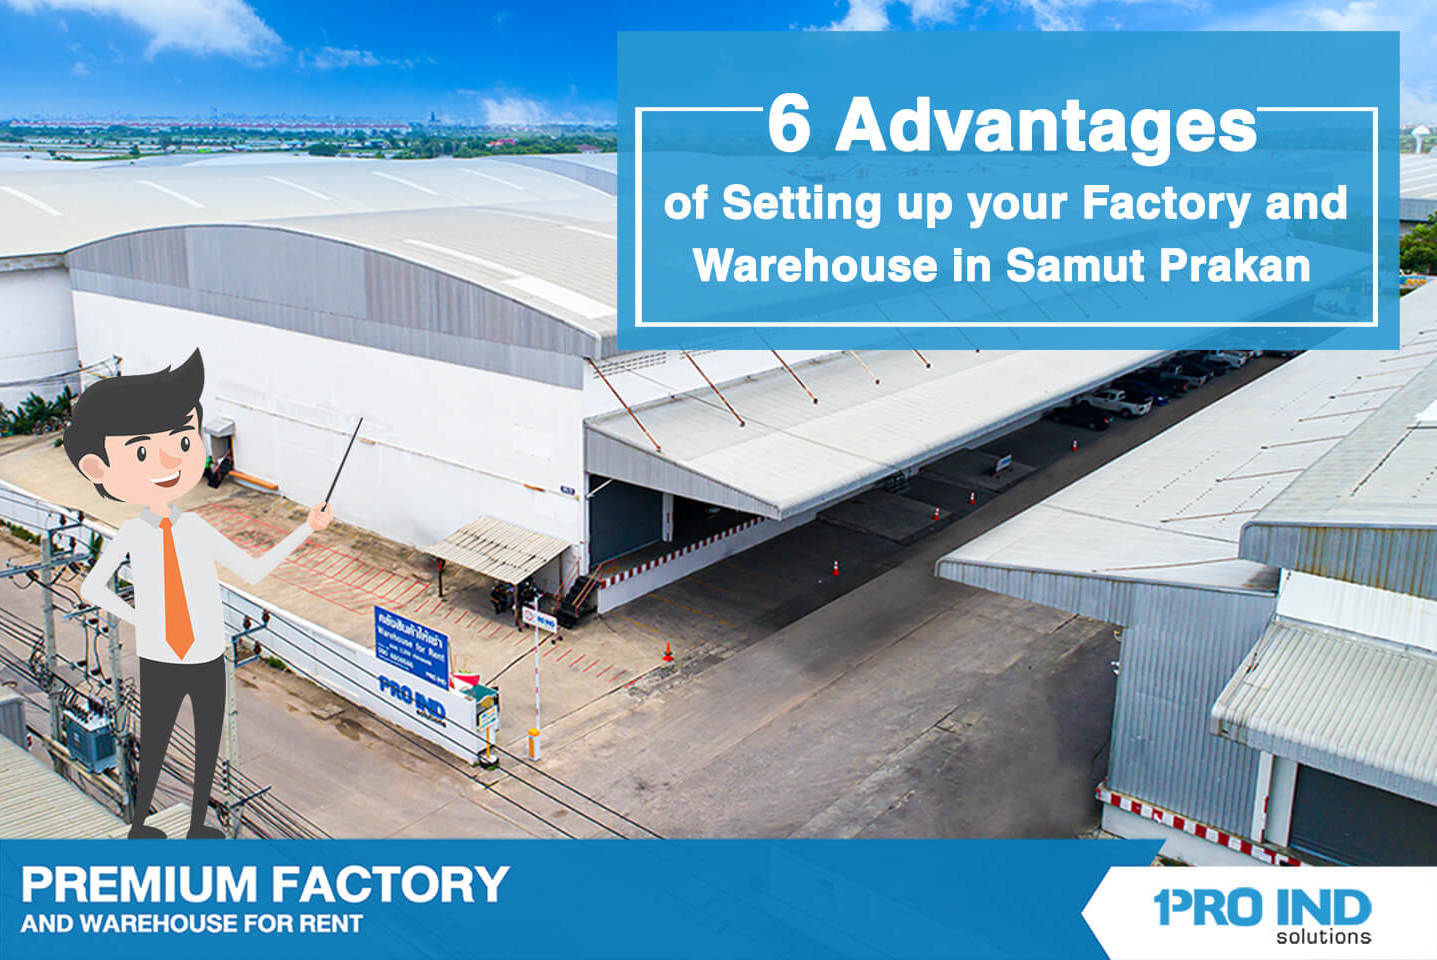 6 Advantages of Setting up your Factory and Warehouse in Samut Prakan